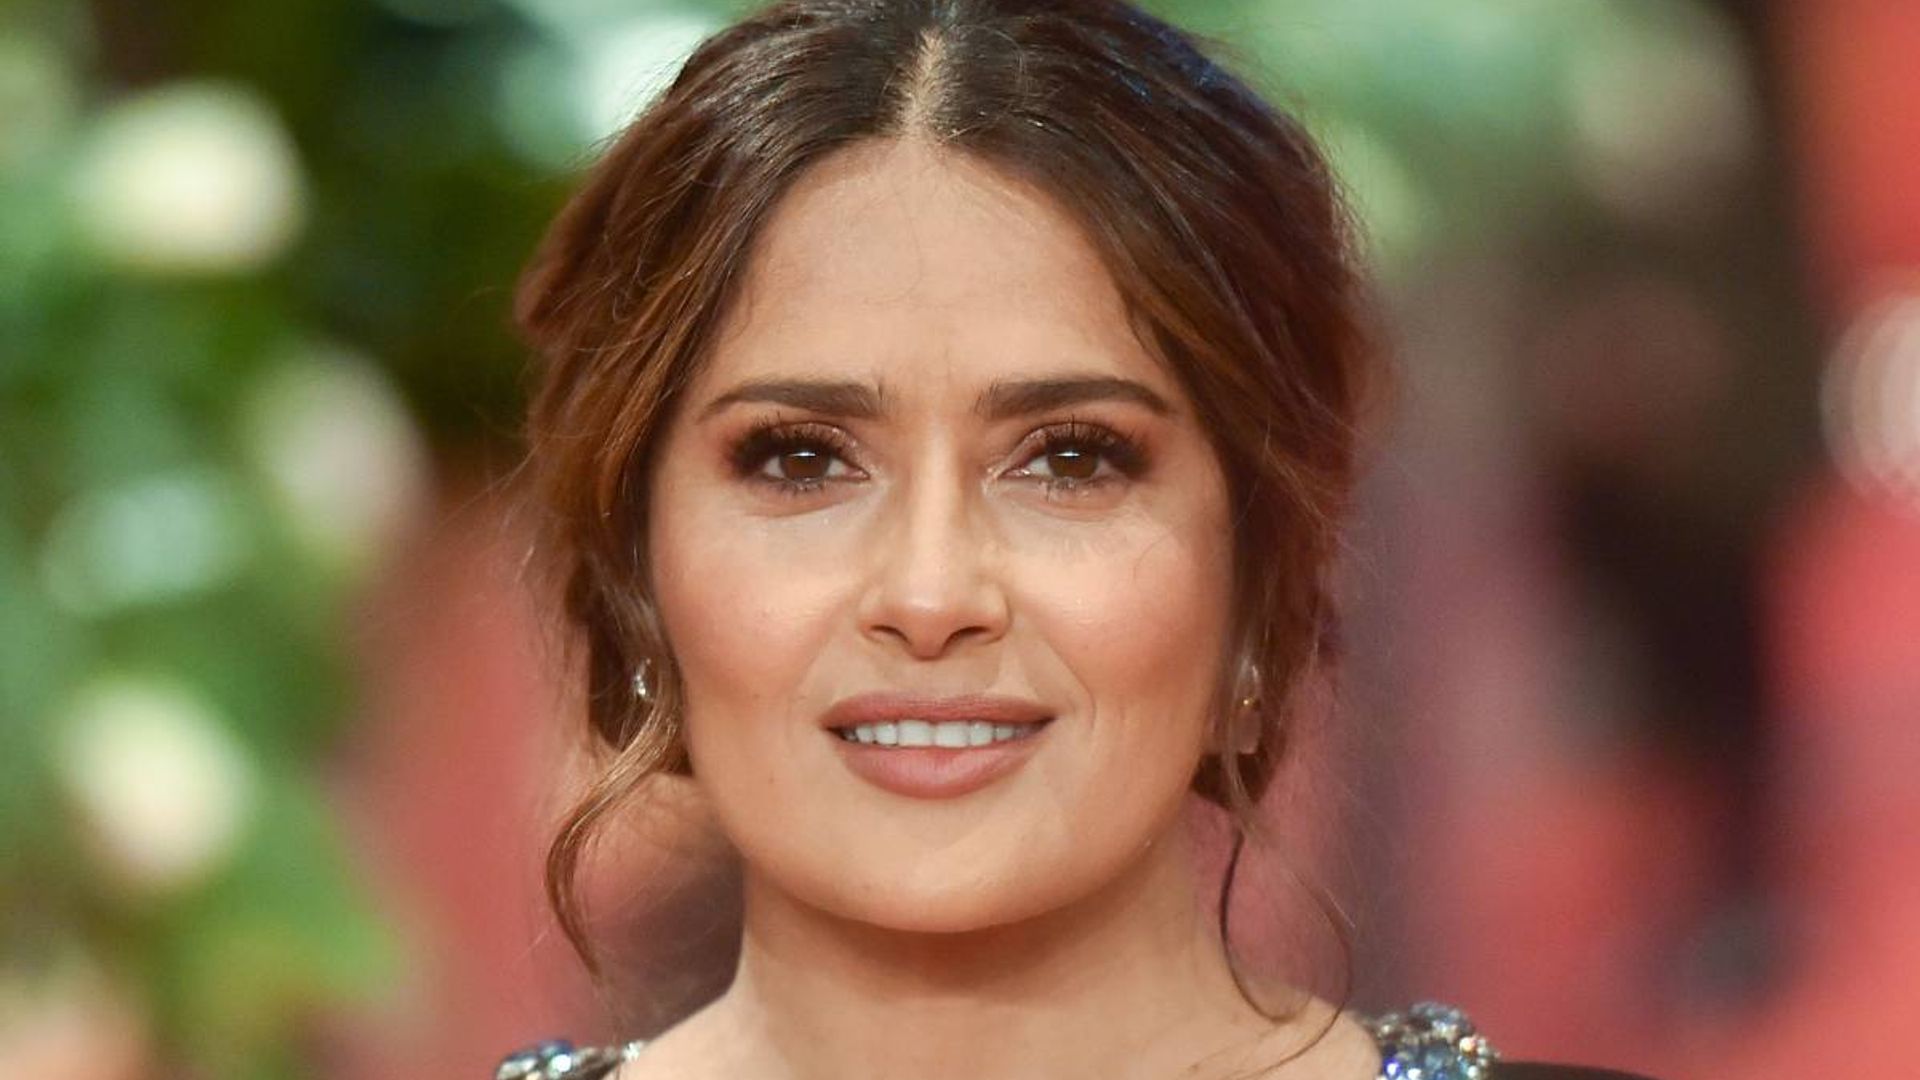 Salma Hayek's iconic hairstyle looks totally different in must-see throwback photo